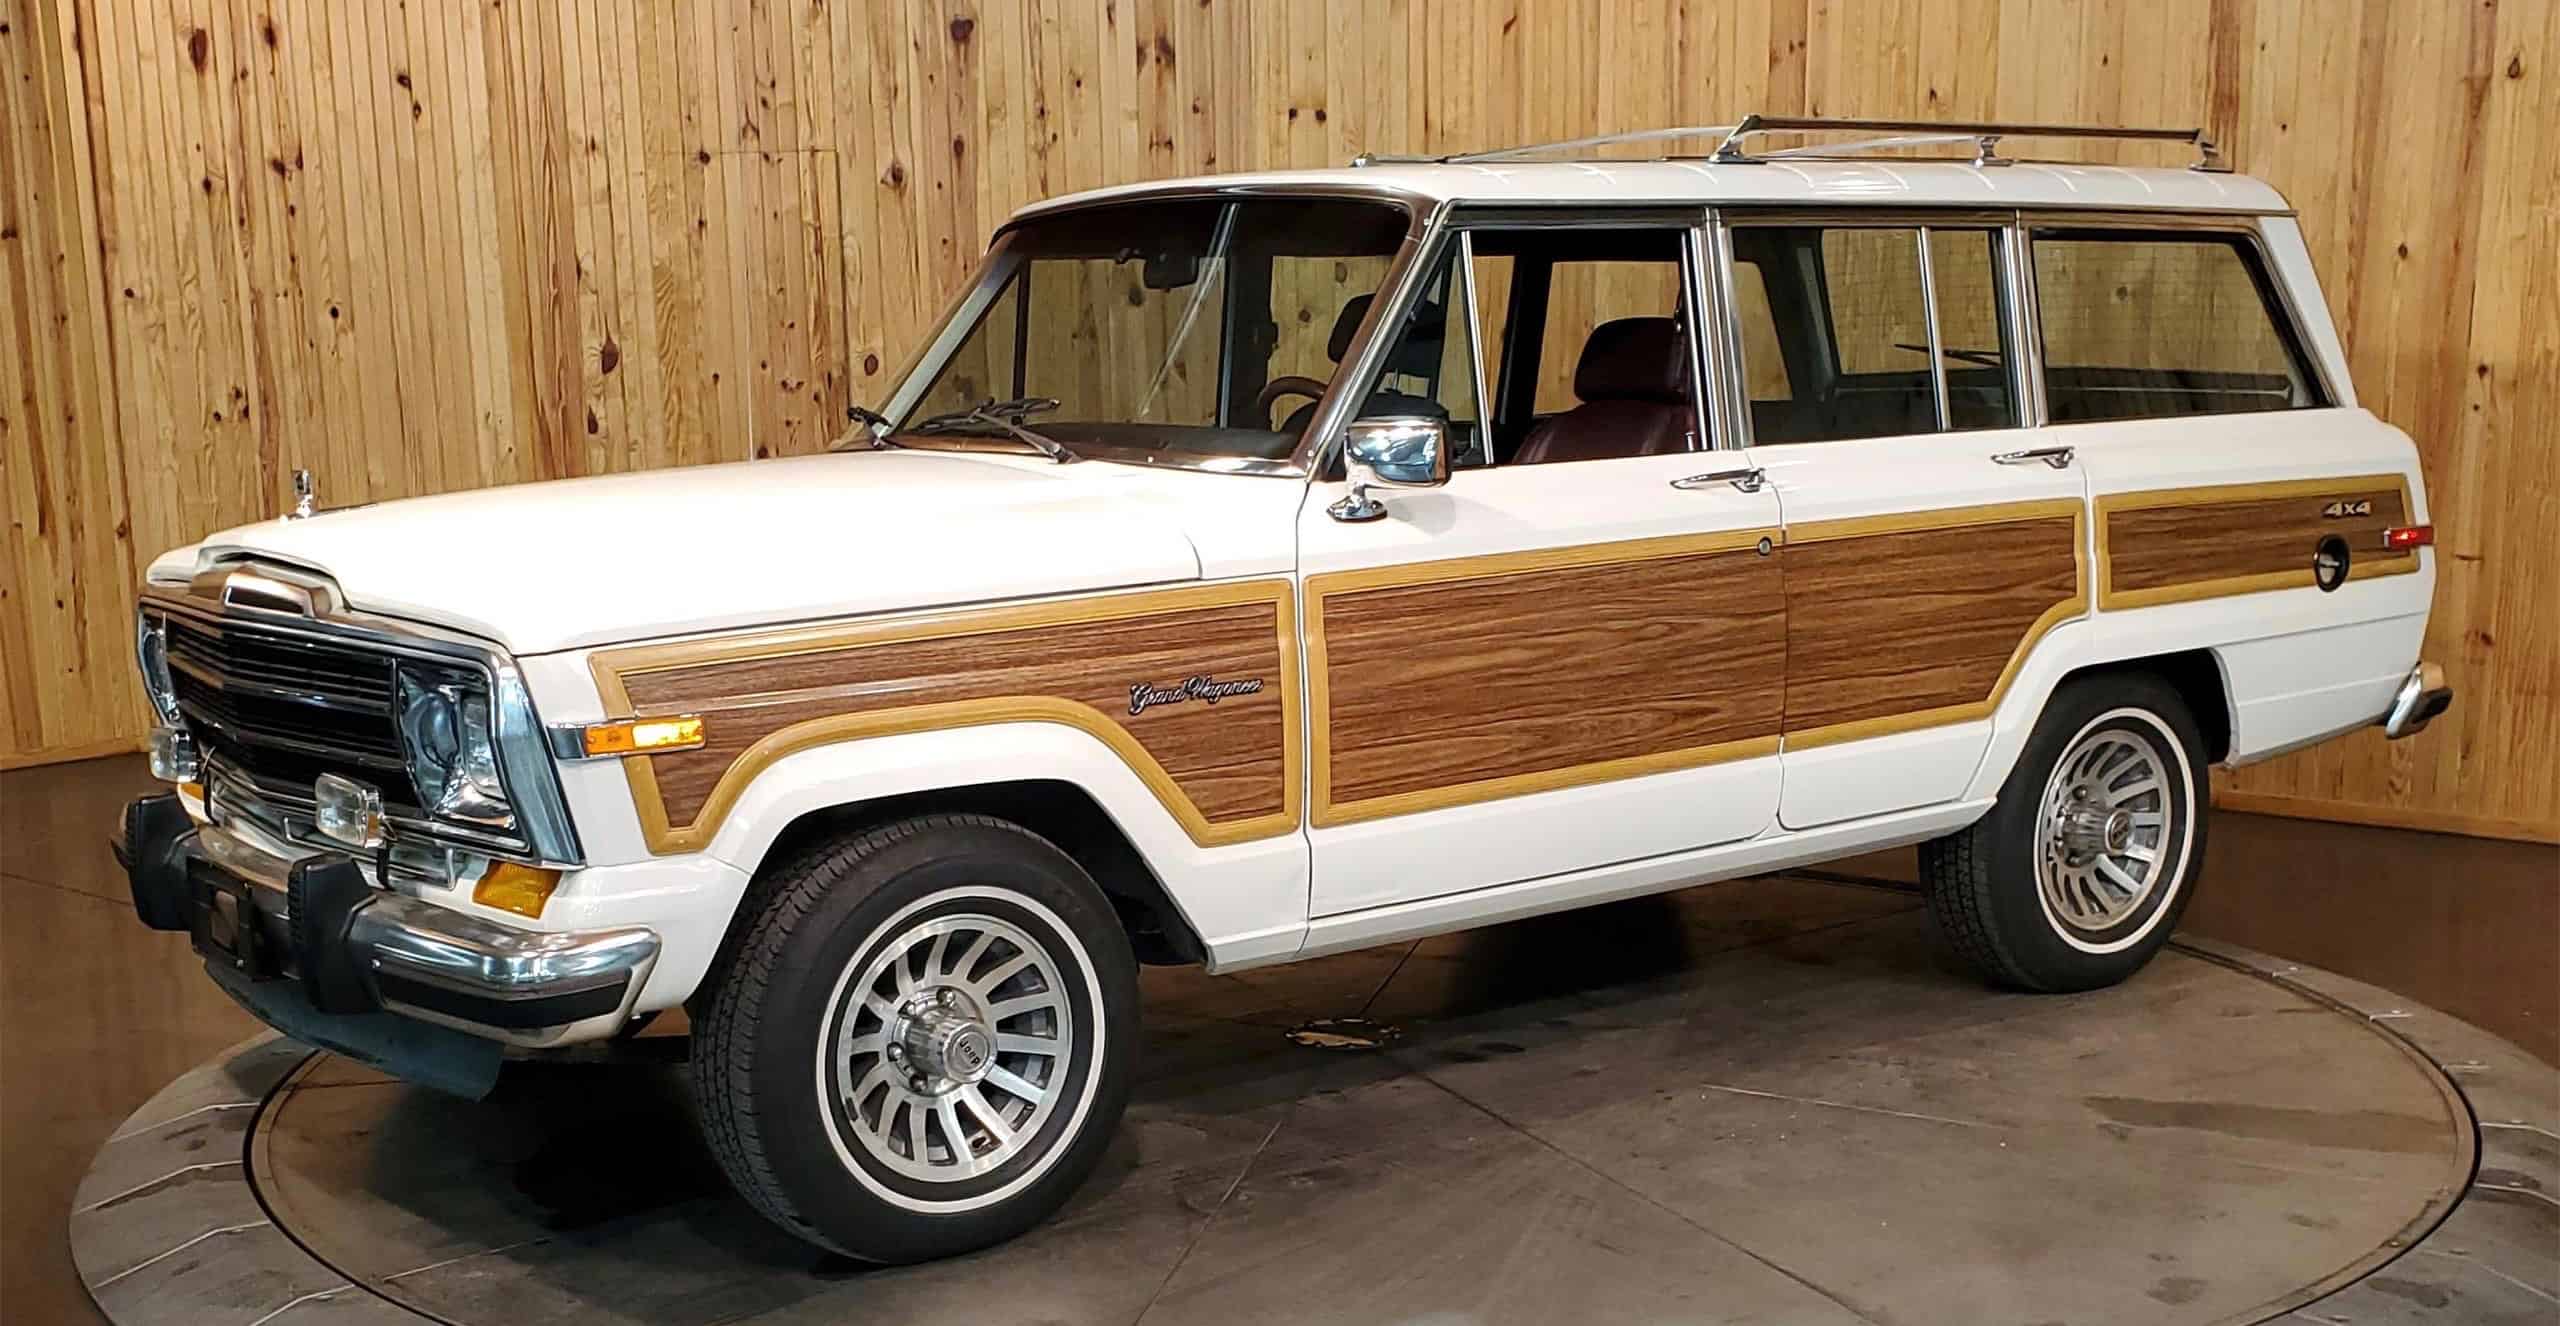 1989 Jeep Grand Wagoneer, This vintage SUV won’t set you back nearly as much as the one sold recently at auction, ClassicCars.com Journal